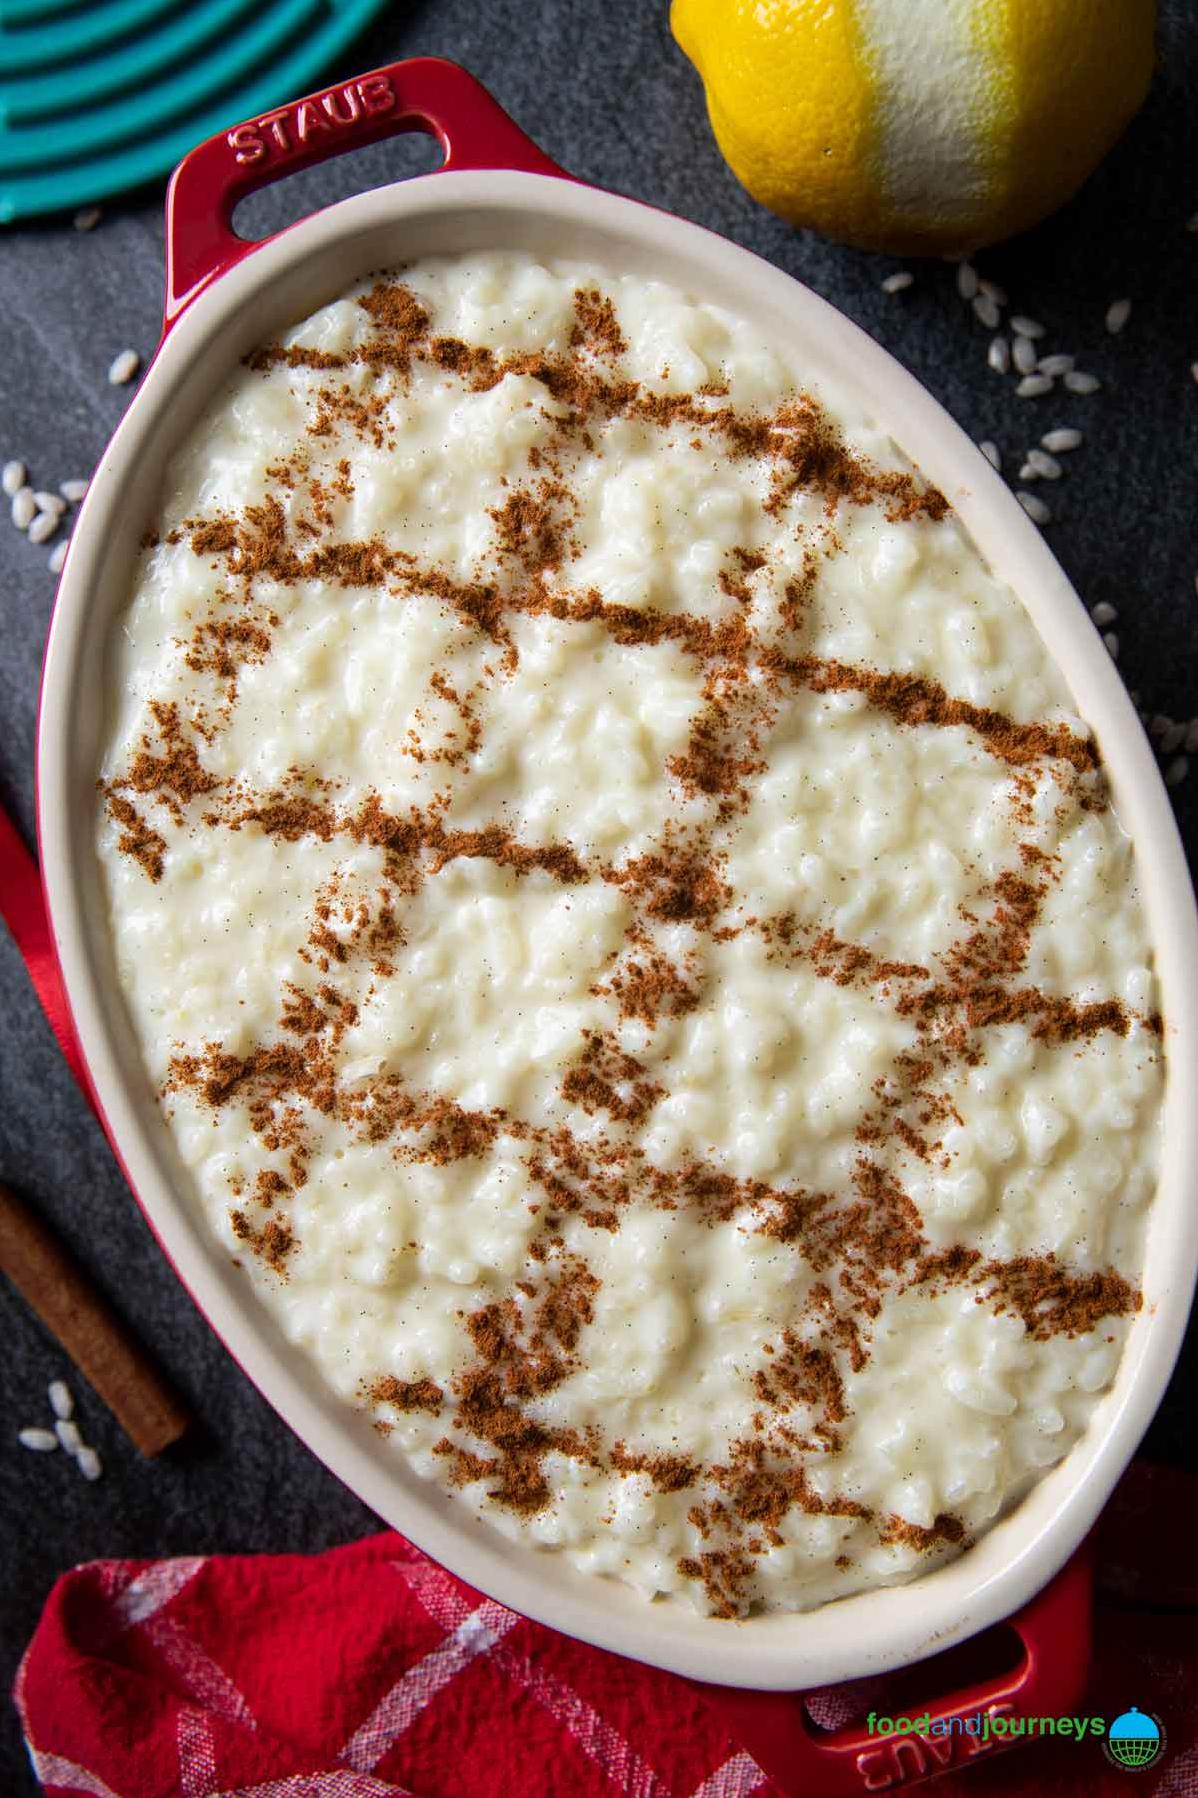  A warm and cozy bowl of Arroz Doce on a chilly night